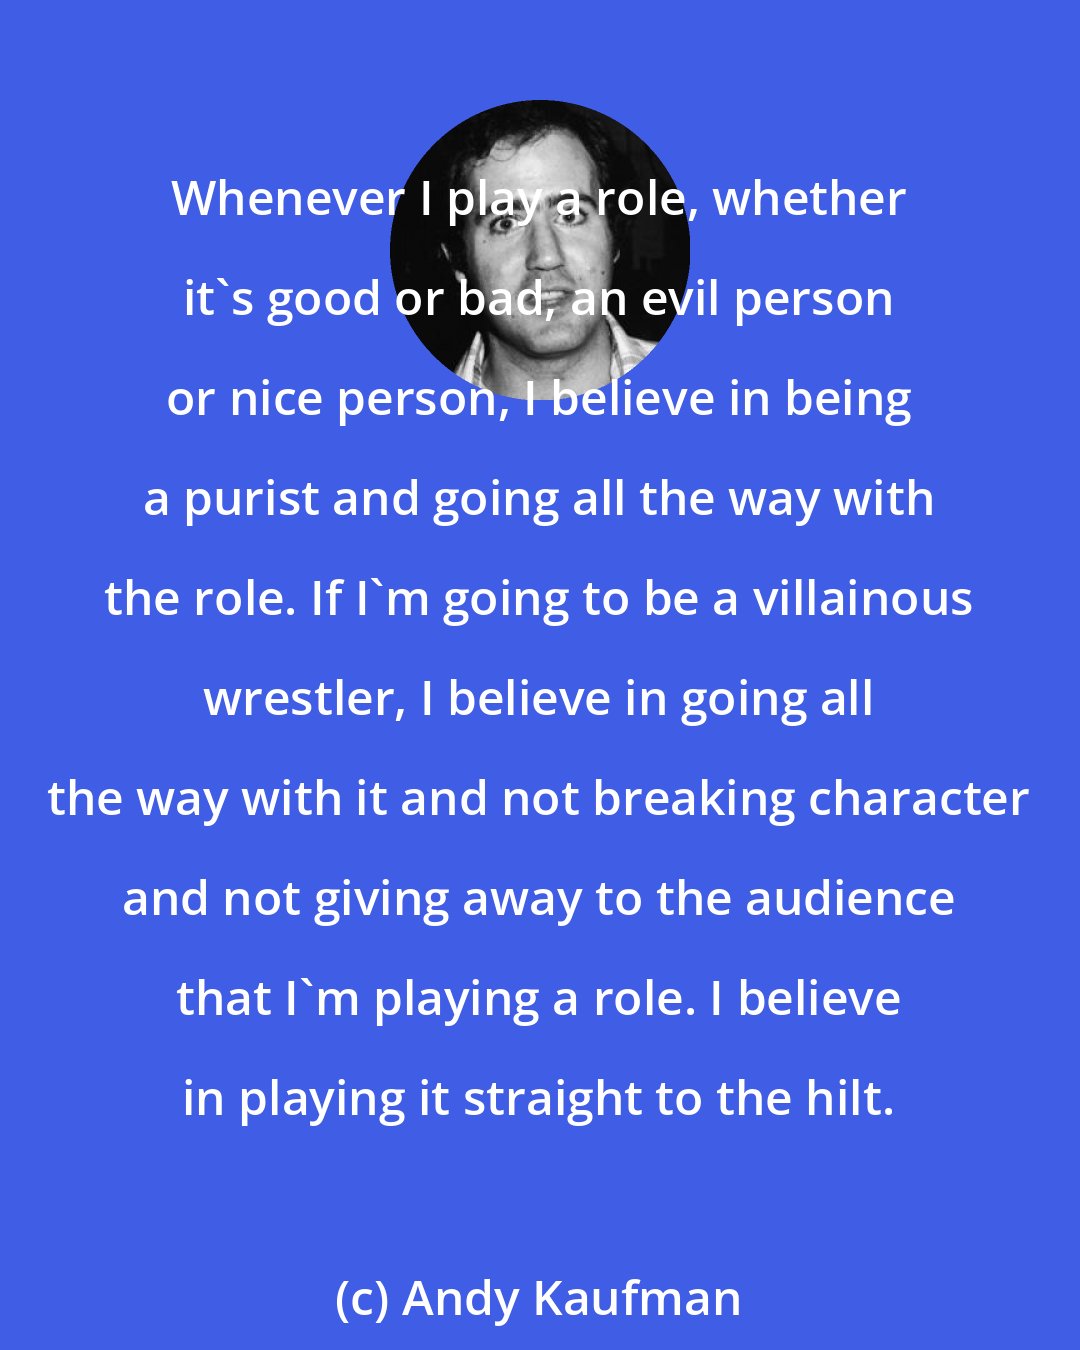 Andy Kaufman: Whenever I play a role, whether it's good or bad, an evil person or nice person, I believe in being a purist and going all the way with the role. If I'm going to be a villainous wrestler, I believe in going all the way with it and not breaking character and not giving away to the audience that I'm playing a role. I believe in playing it straight to the hilt.